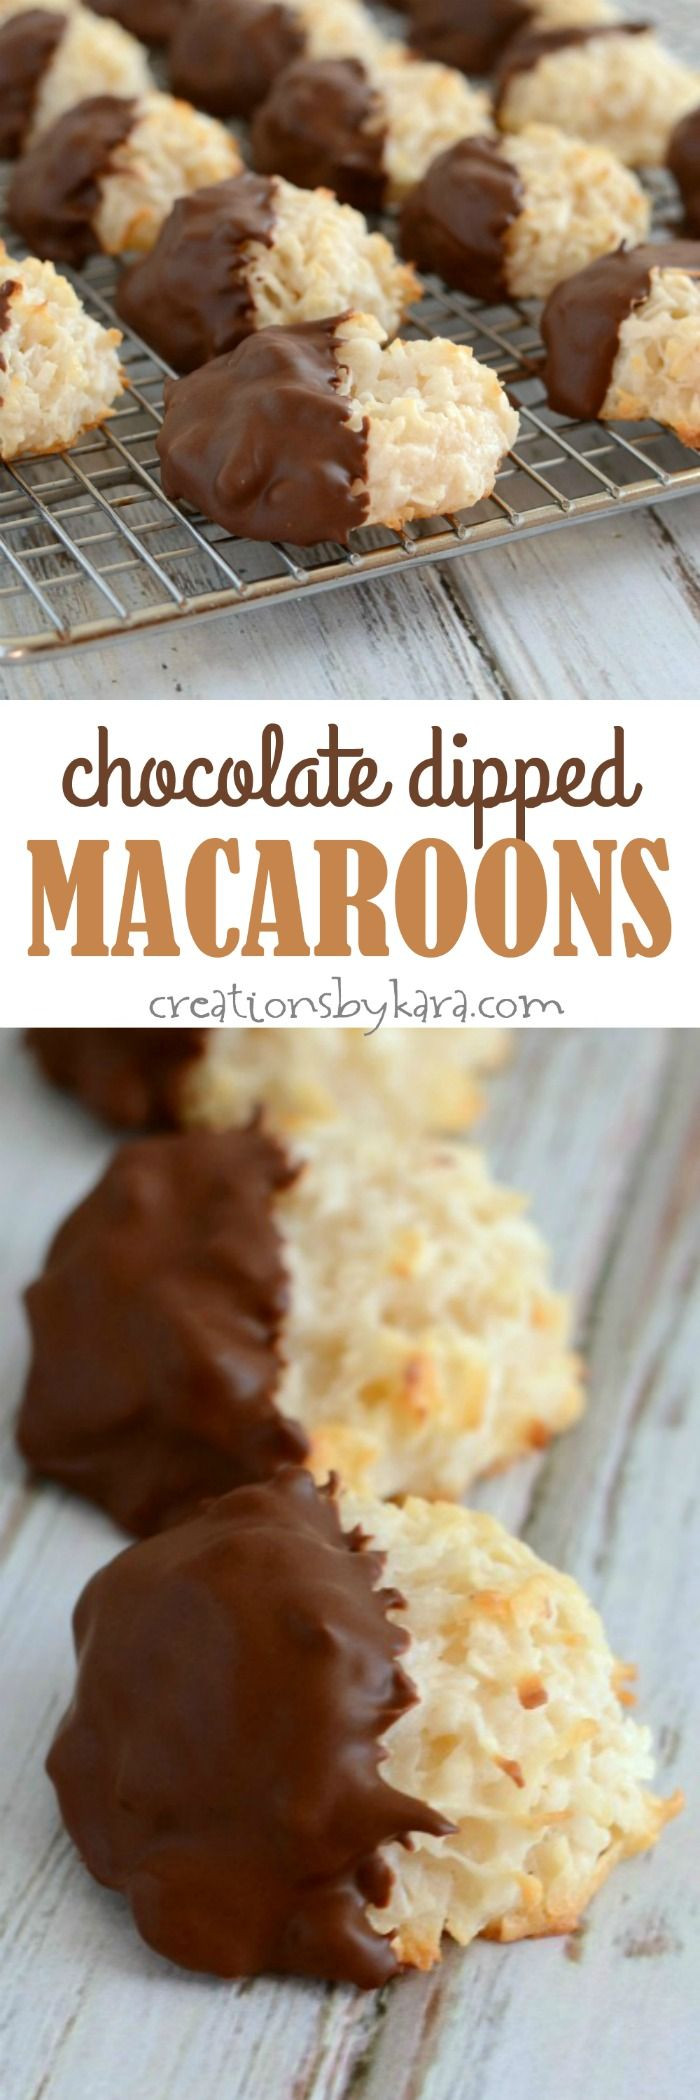 Chocolate Dipped Coconut Macaroons Recipe
 Chocolate Dipped Coconut Macaroons a delicious cookie